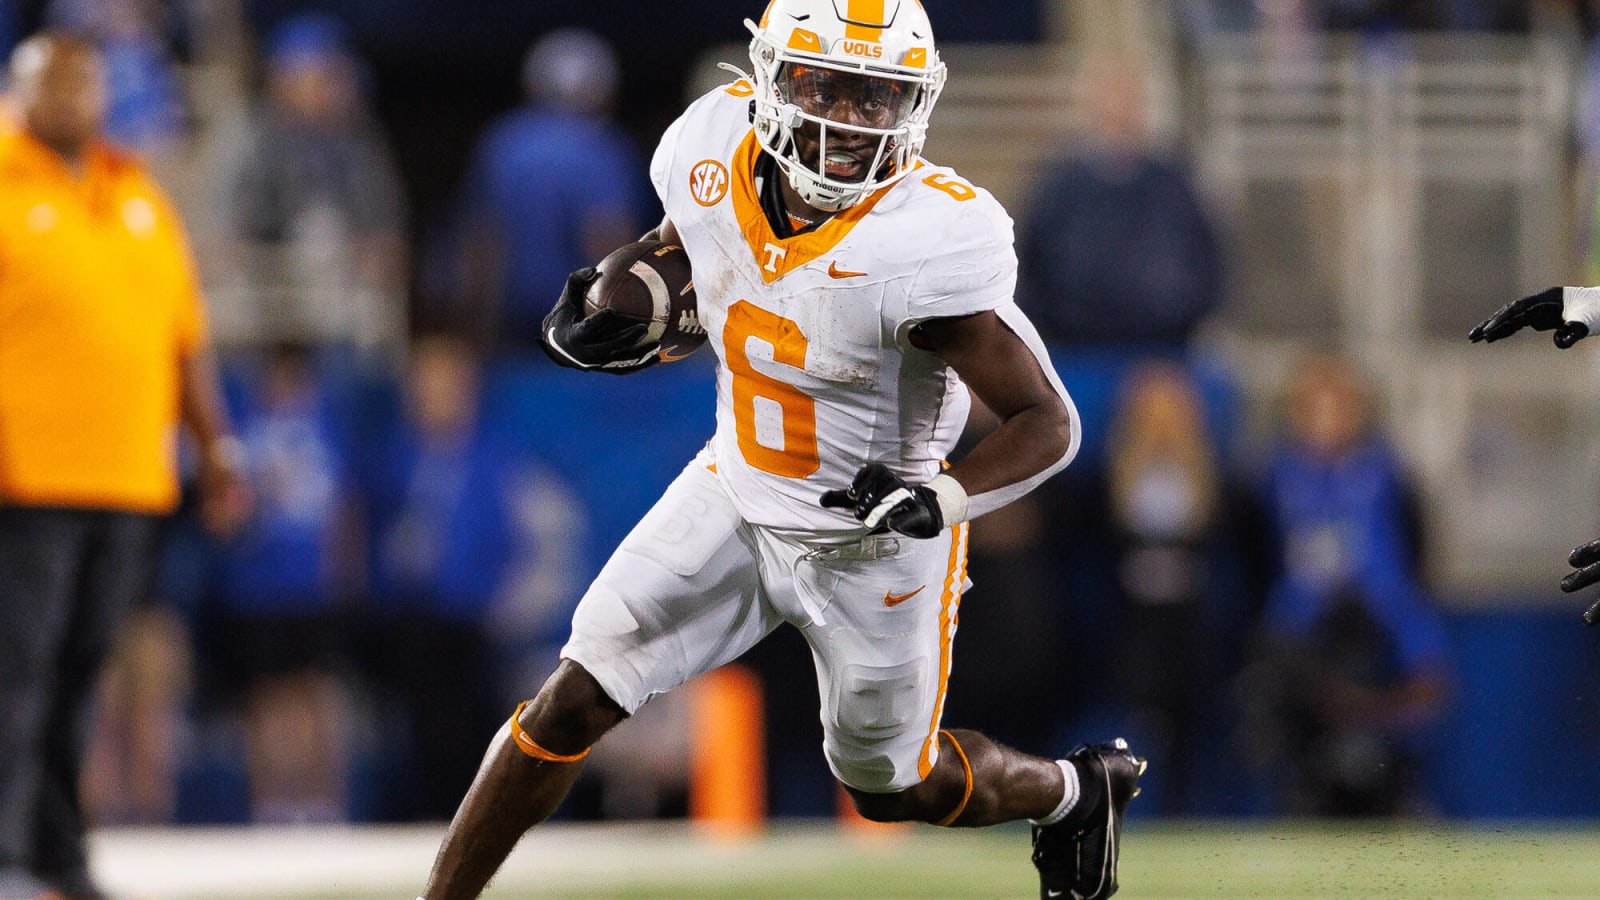 One of the Vols&#39; most important players officially announced his return to Tennessee